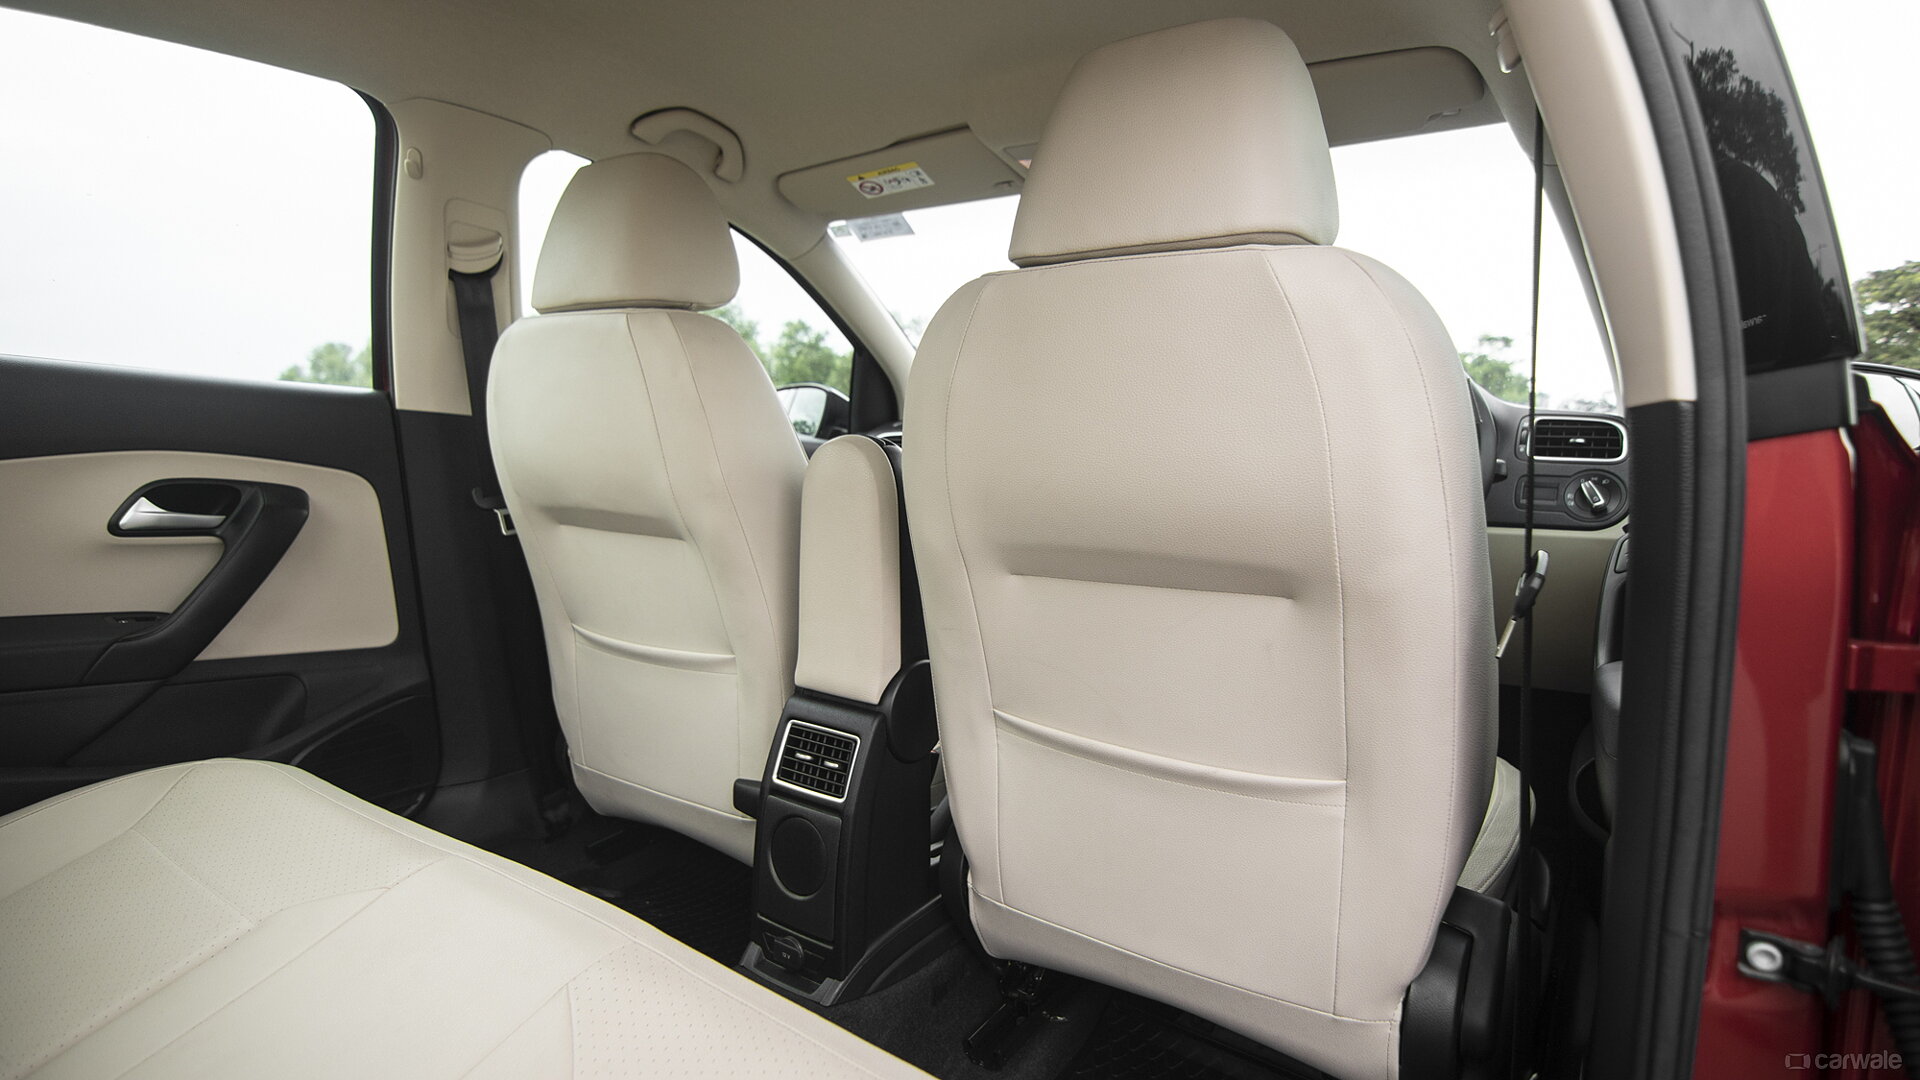 Vento Front Seat Back Pockets Image, Vento Photos in India - CarWale